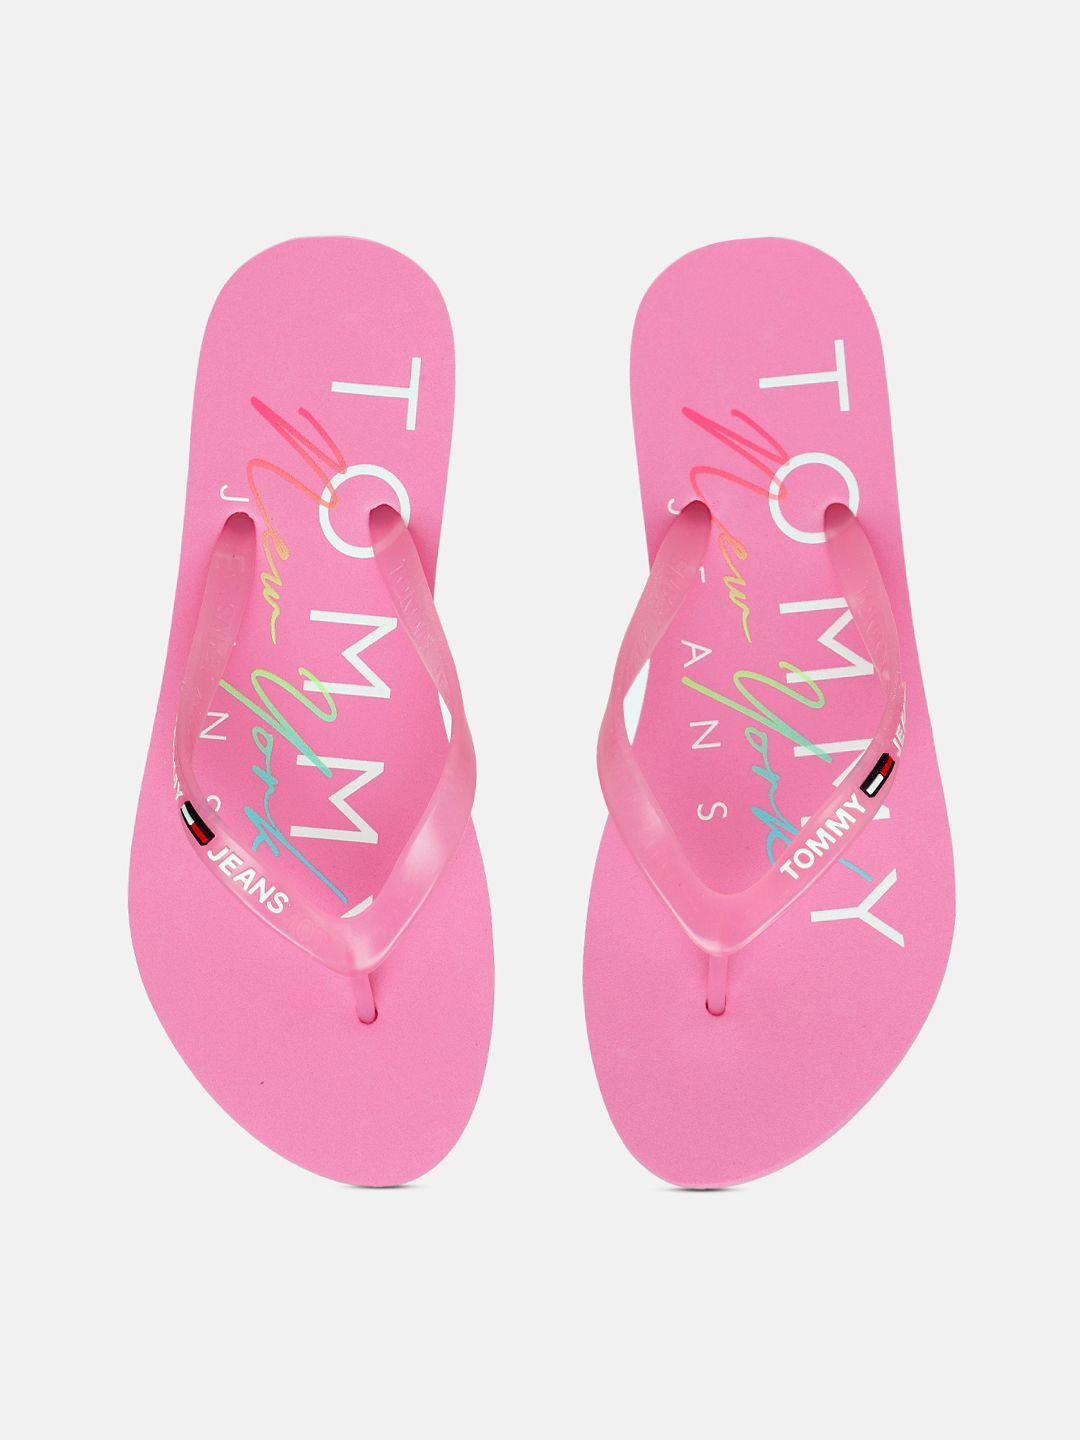 Tommy Hilfiger Women Pink Printed Thong Flip-Flops Price in India